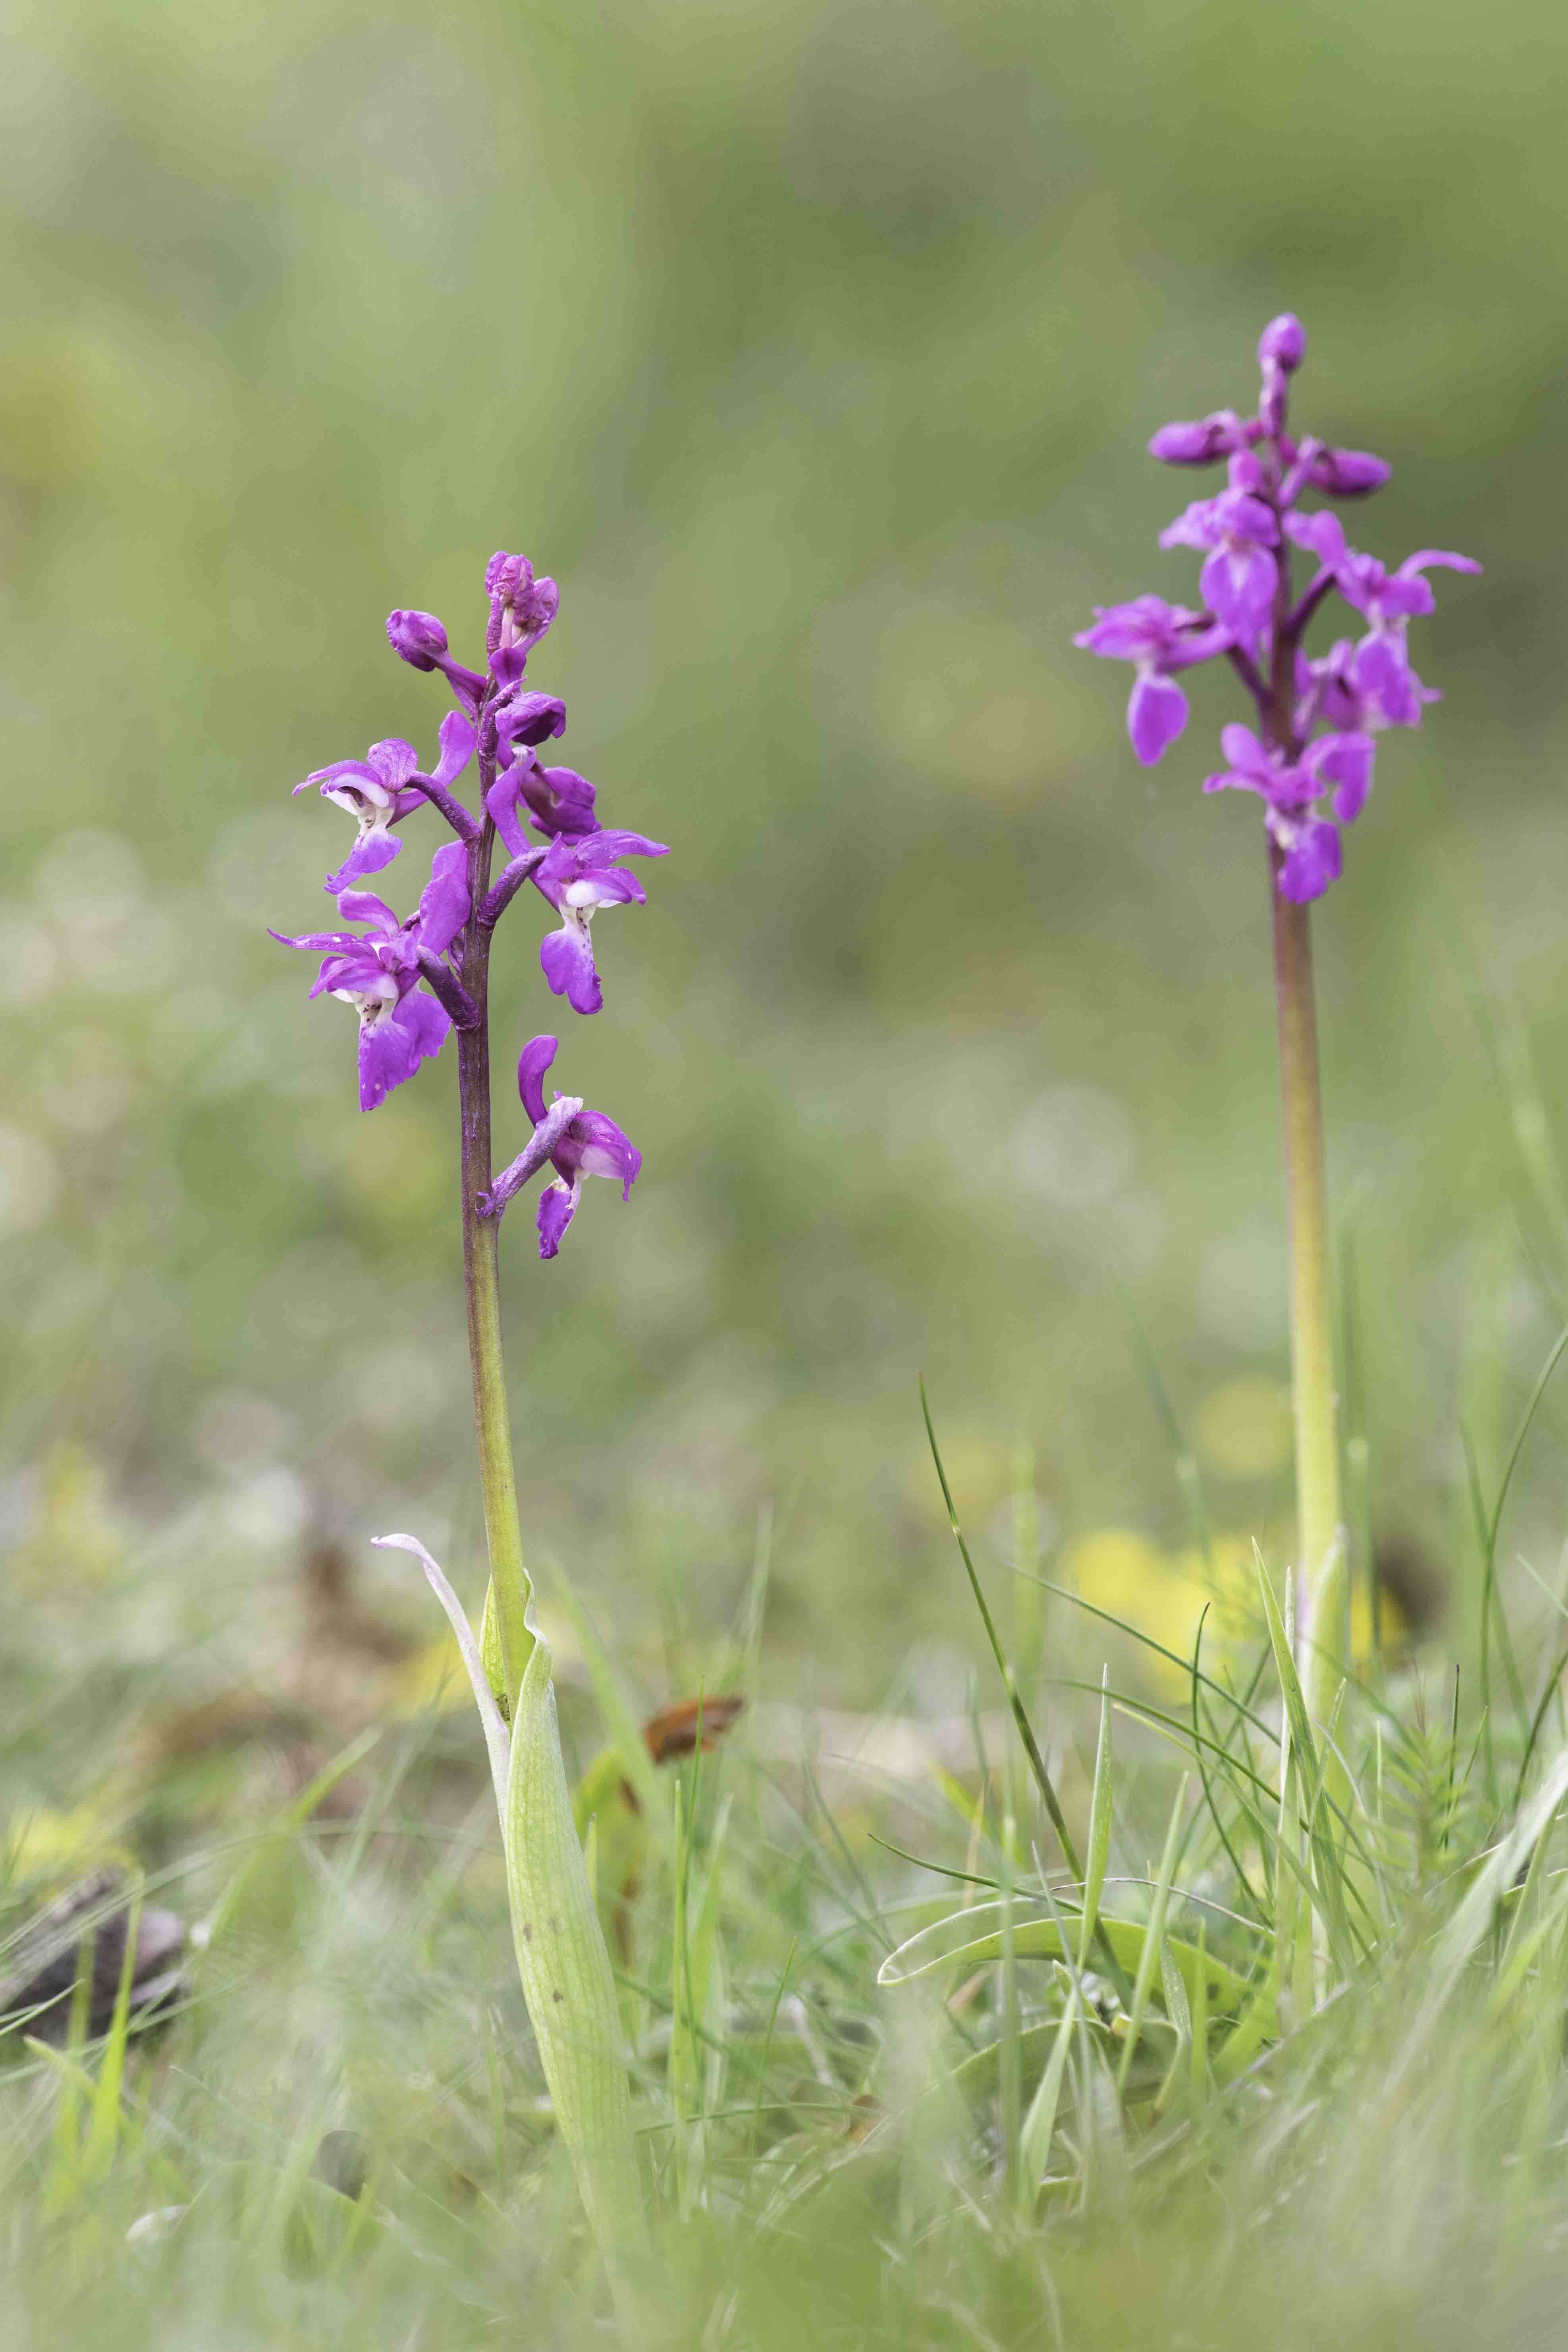 Mannetjesorchis (Orchis mascula)